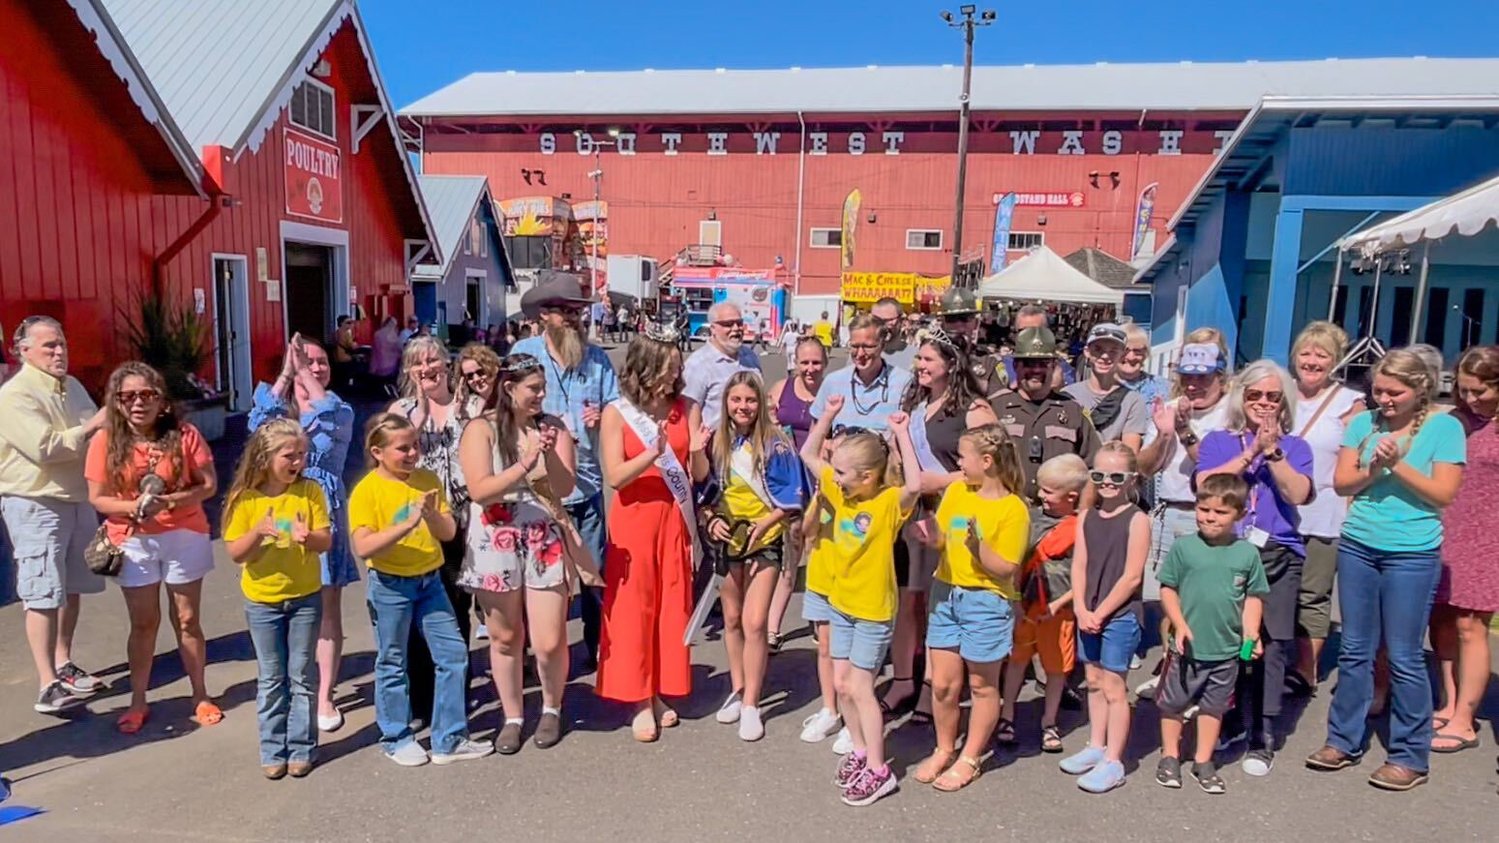 Fair officials, Little Miss Friendly contestants and others cut the ribbon to signify the start of the Southwest Washington Fair Tuesday.